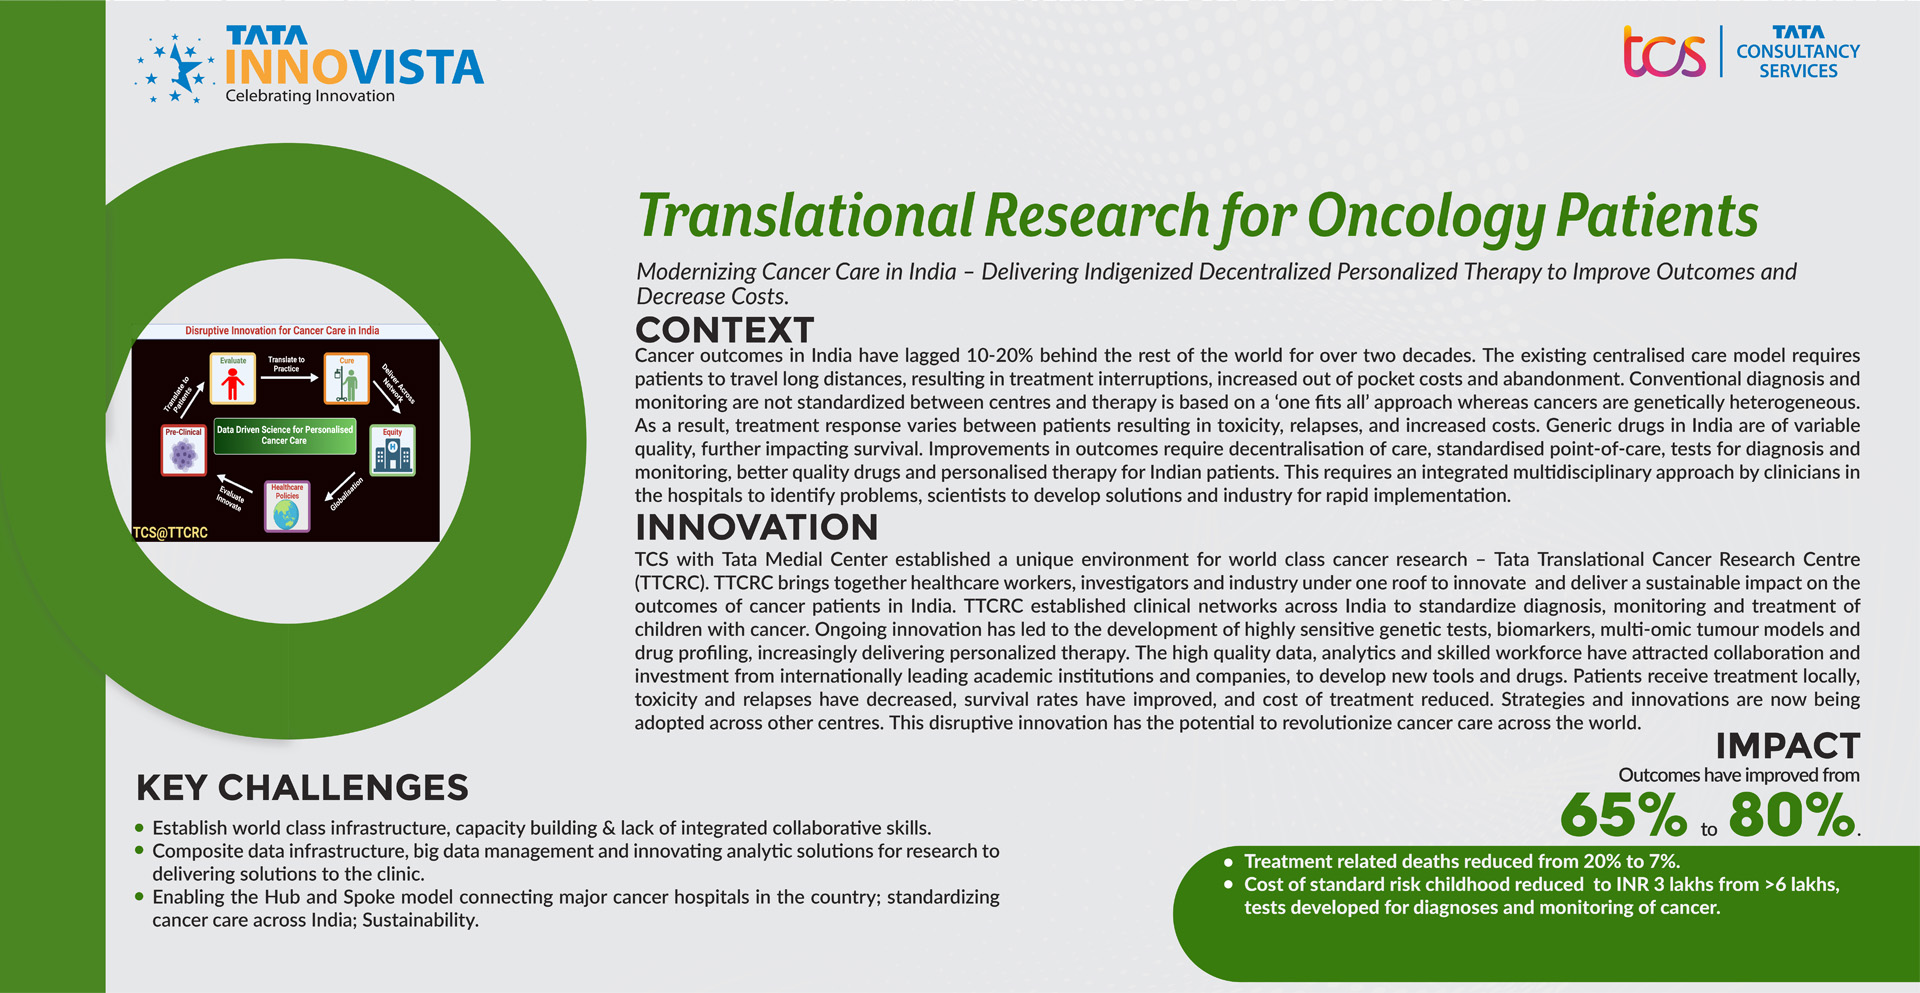 TCS - Translation Research for Oncology Patients